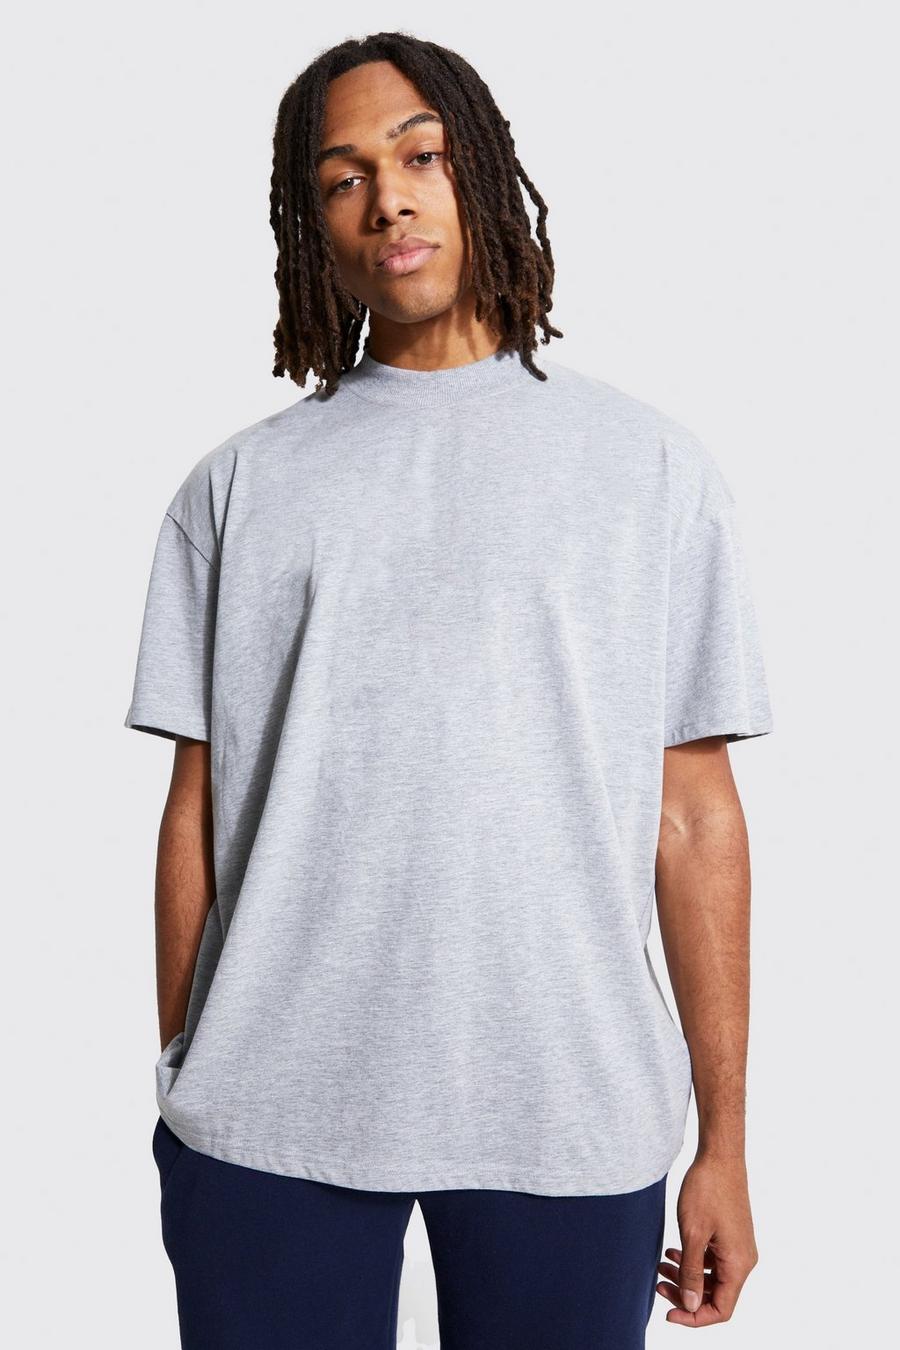 Grey REEL Cotton Oversized Extended Neck T-shirt